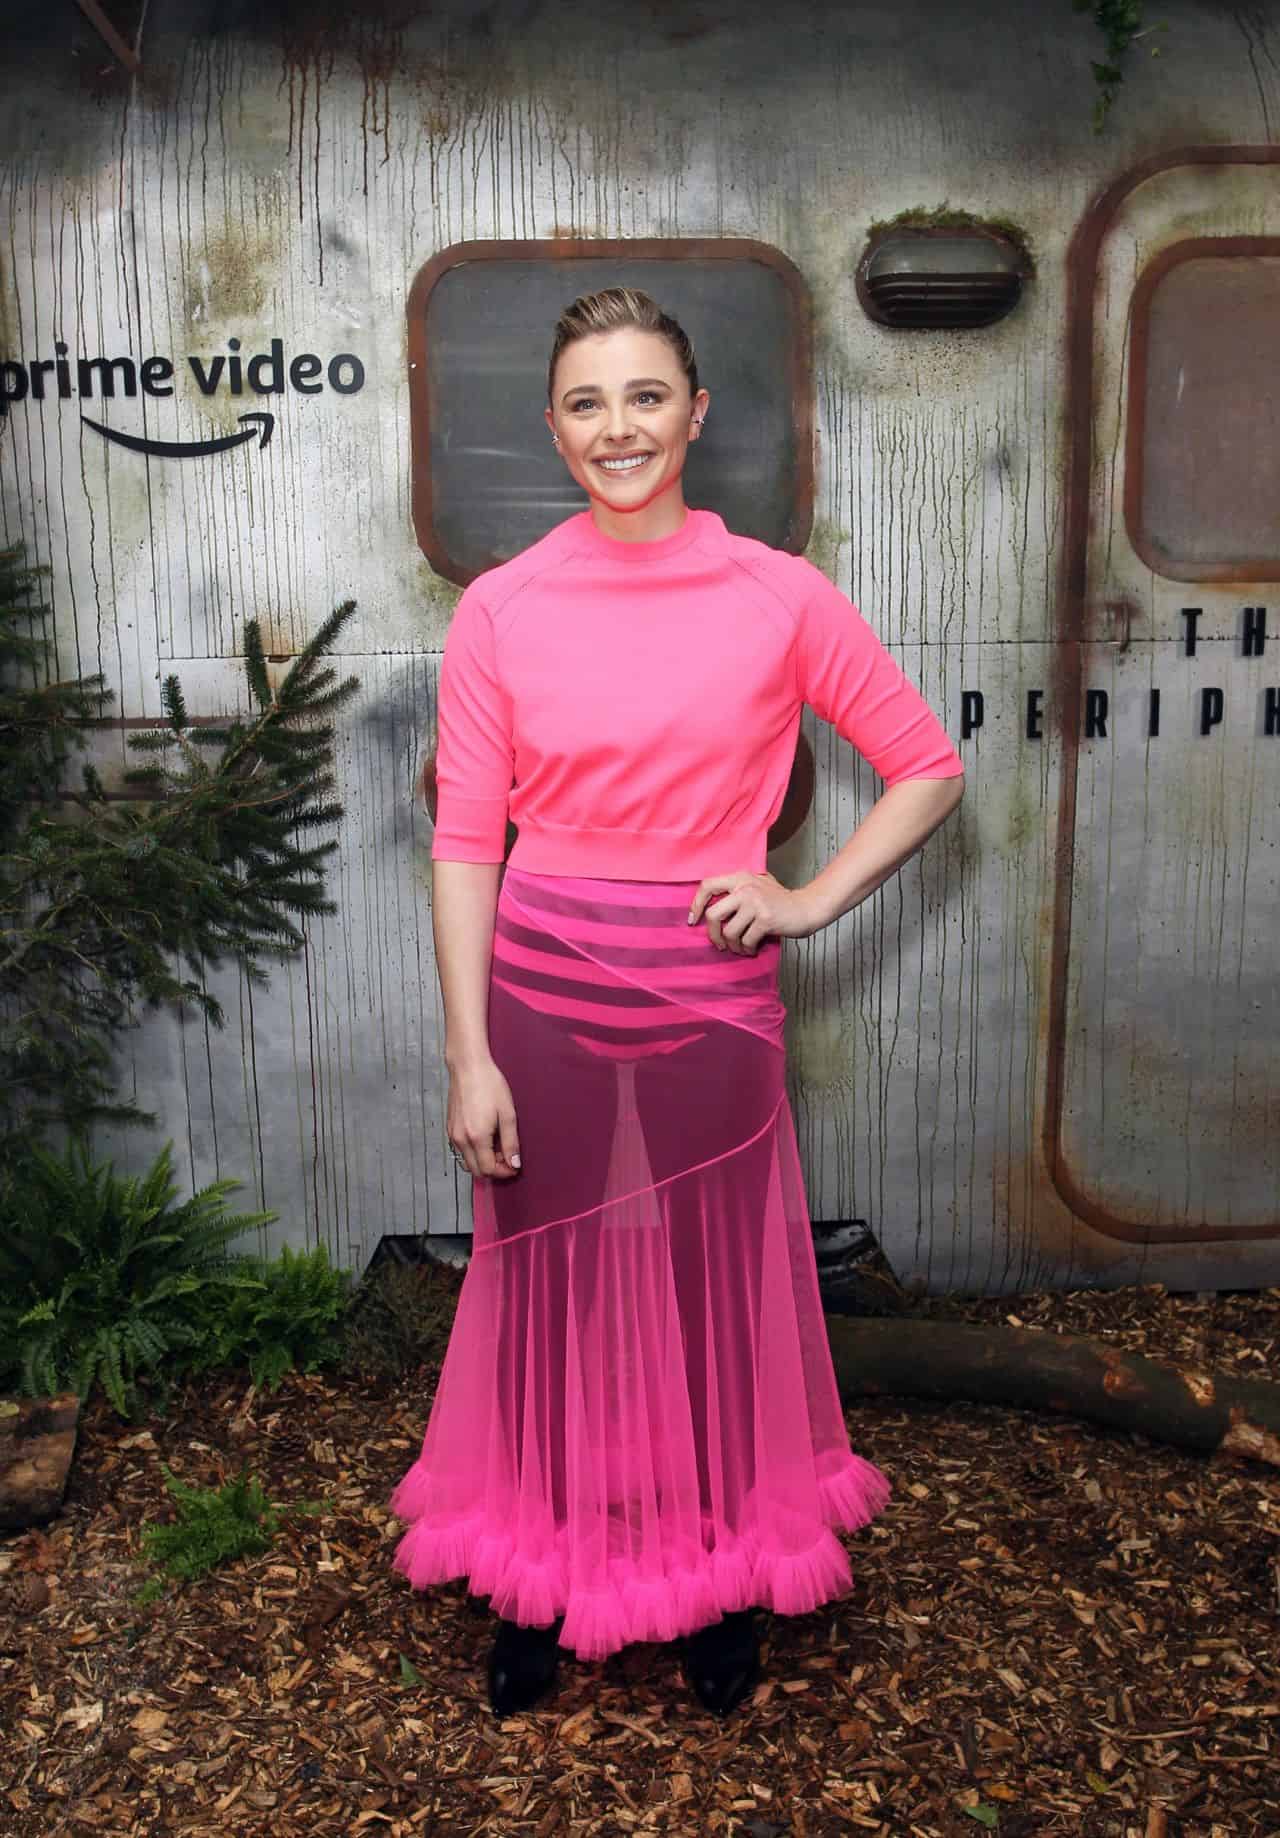 Chloe Grace Moretz Looked Incredible at "The Peripheral" Special Screening in London